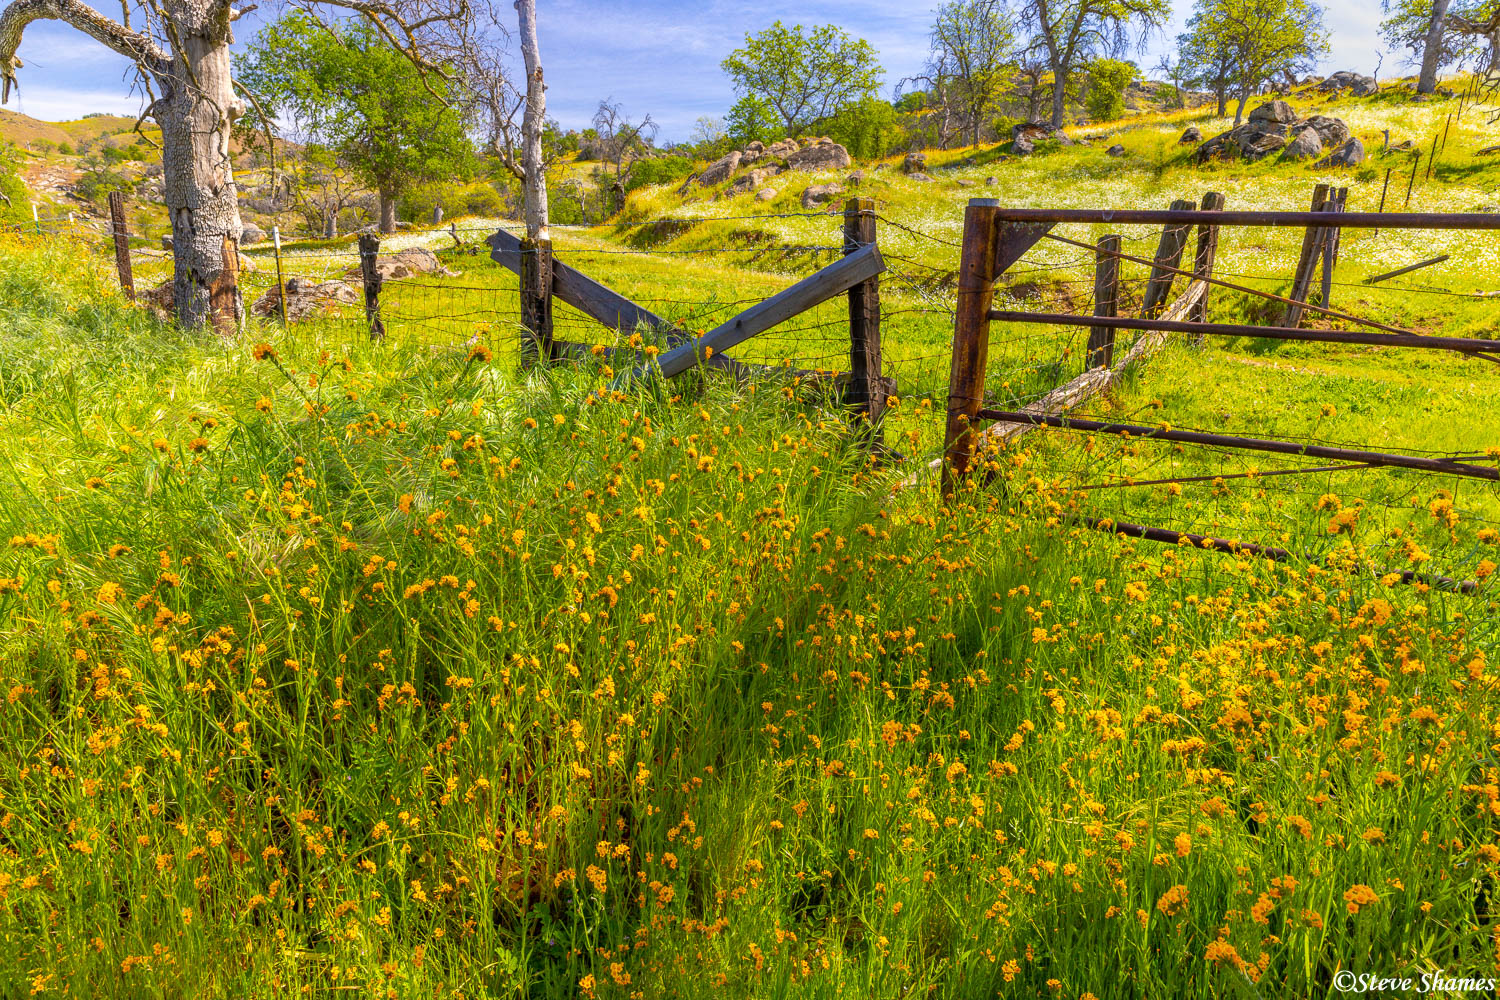 A pleasant rural spring scene in the foothills of Fresno County.